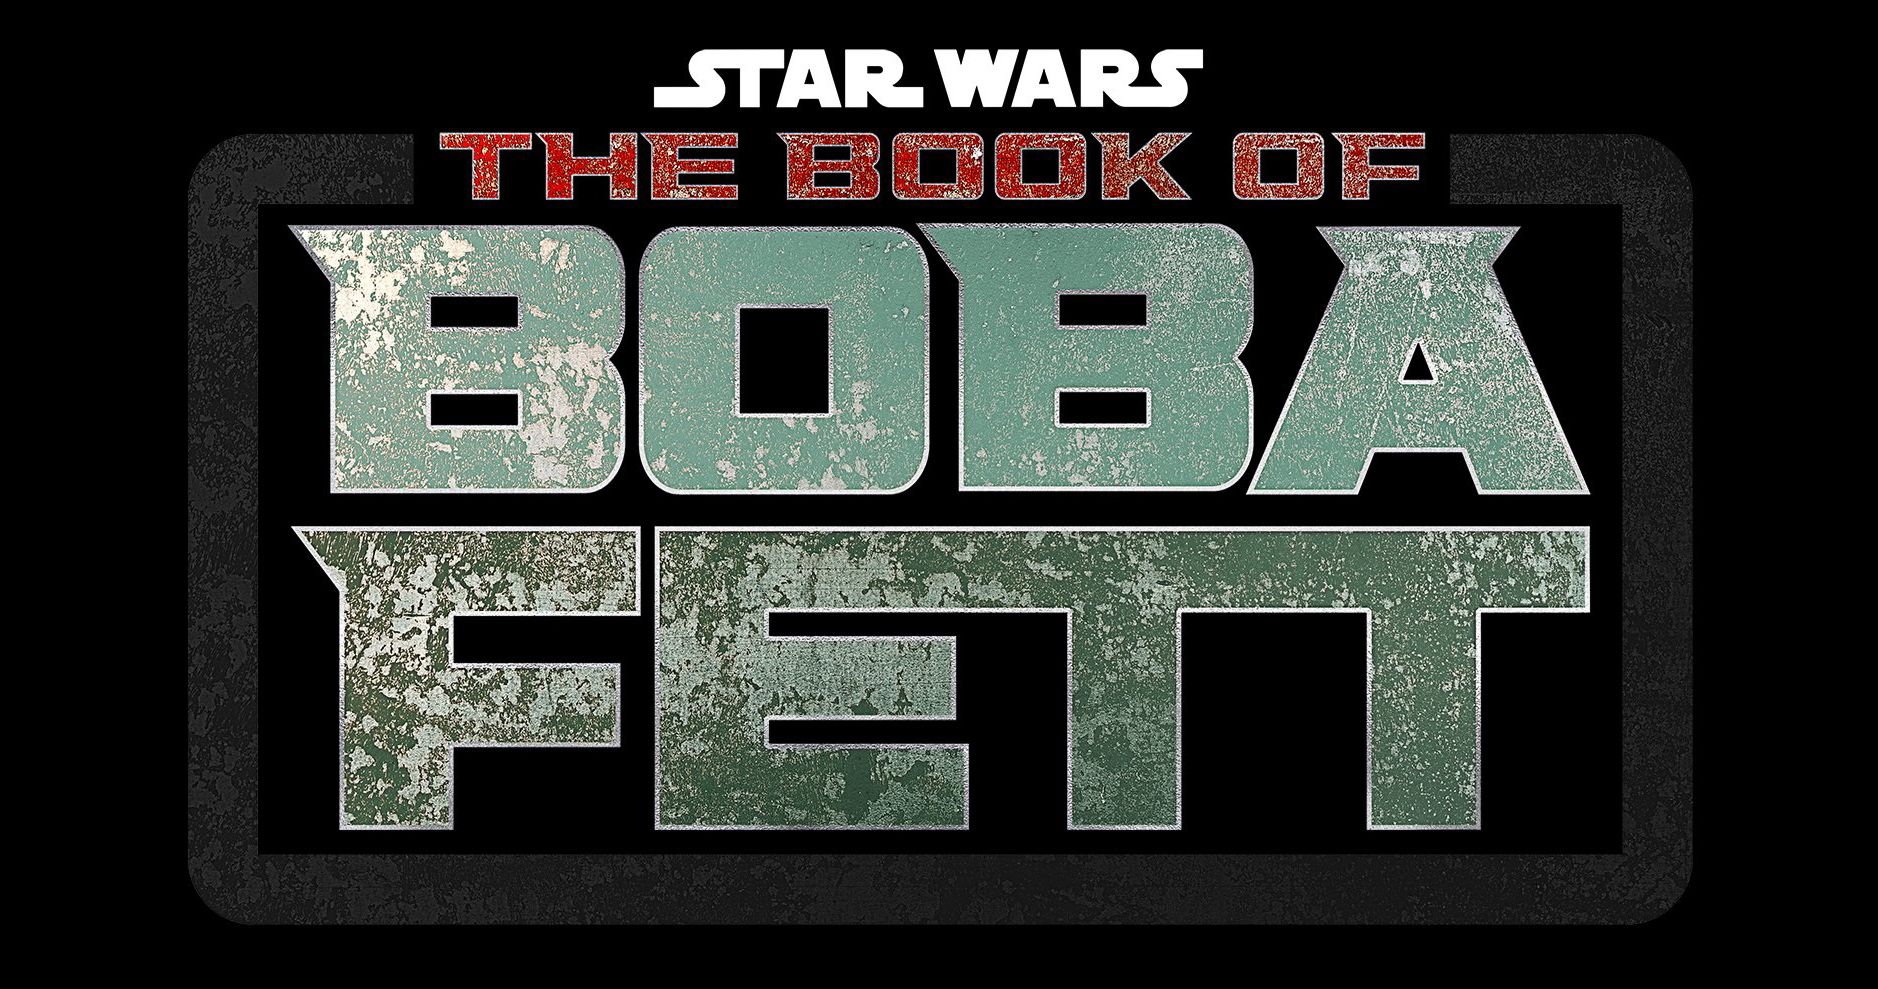 The Book of Boba Fett Logo and Disney+ Series Details Revealed